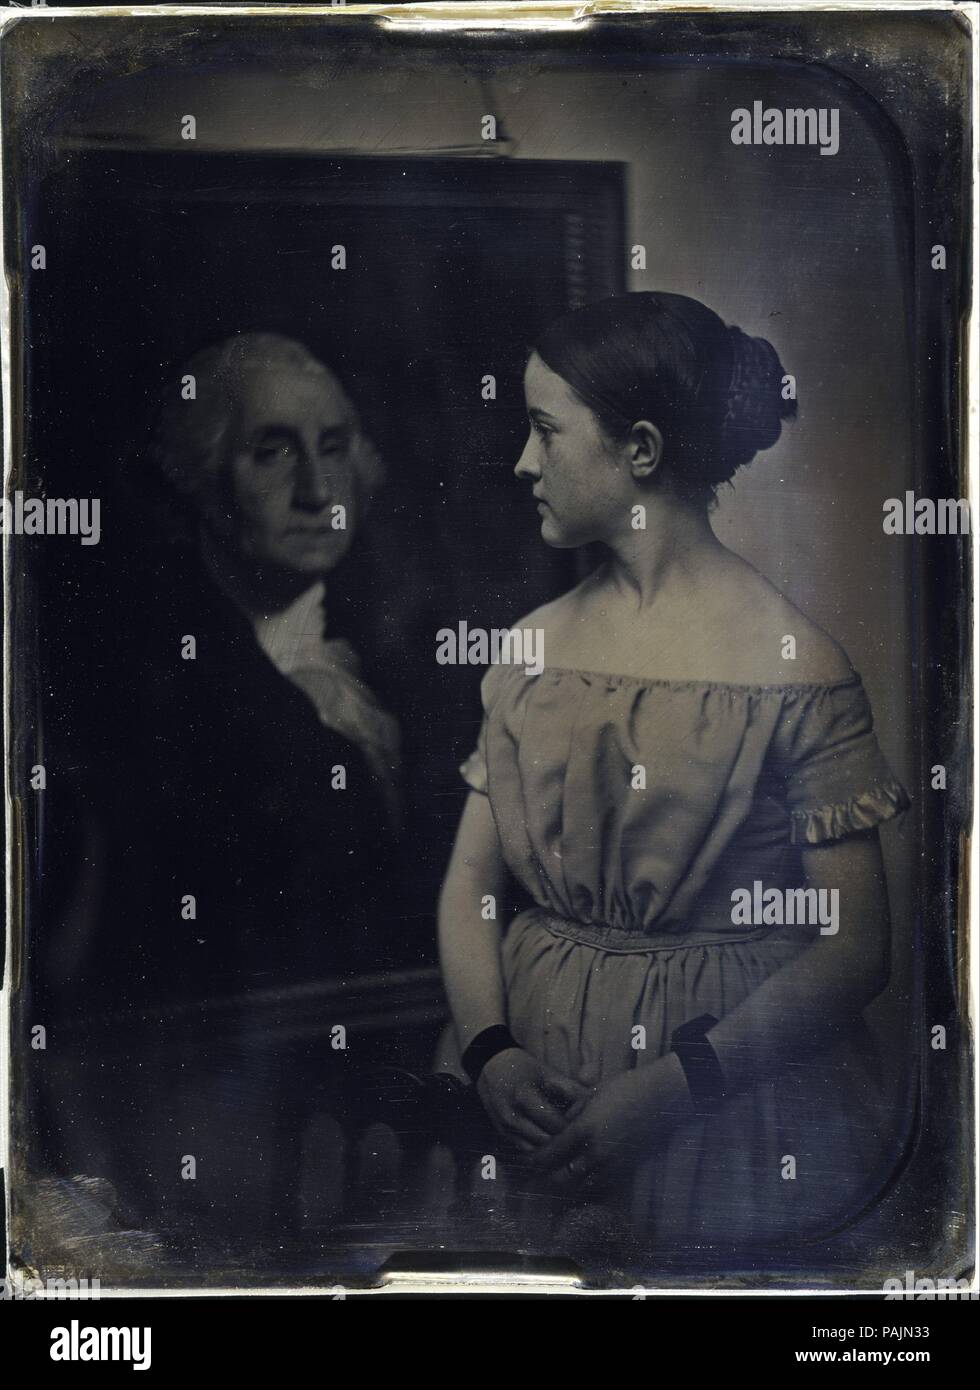 [Girl with Portrait of George Washingtion]. Artist: Albert Sands Southworth (American, West Fairlee, Vermont 1811-1894 Charlestown, Massachusetts); Josiah Johnson Hawes (American, Wayland, Massachusetts 1808-1901 Crawford Notch, New Hampshire). Dimensions: 21.6 x 16.5 cm (8 1/2 x 6 1/2 in.). Photography Studio: Southworth and Hawes (American, active 1843-1863). Date: ca. 1850.  The Boston partnership of Southworth and Hawes produced the finest portrait daguerreotypes in America for a clientele that included the leading political, intellectual, and artistic figures.  This first photographic pro Stock Photo